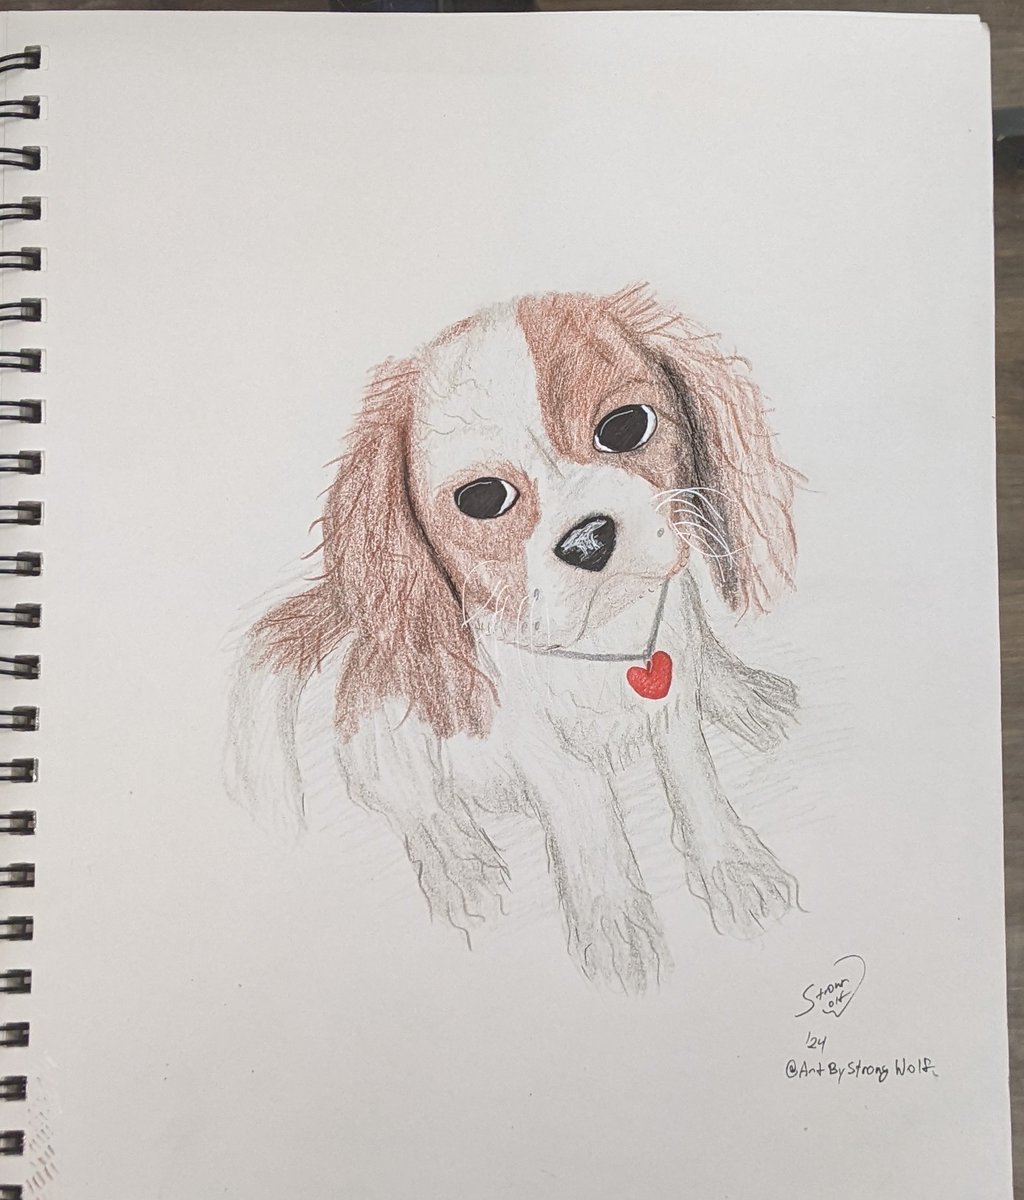 Portrait of a Cavalier King Charles #Spaniel in colored pencil with Micron & Gelly Roll highlights. #cavalierkingcharlesspaniel #petportrait #coloredpencil #dogportrait #browndog